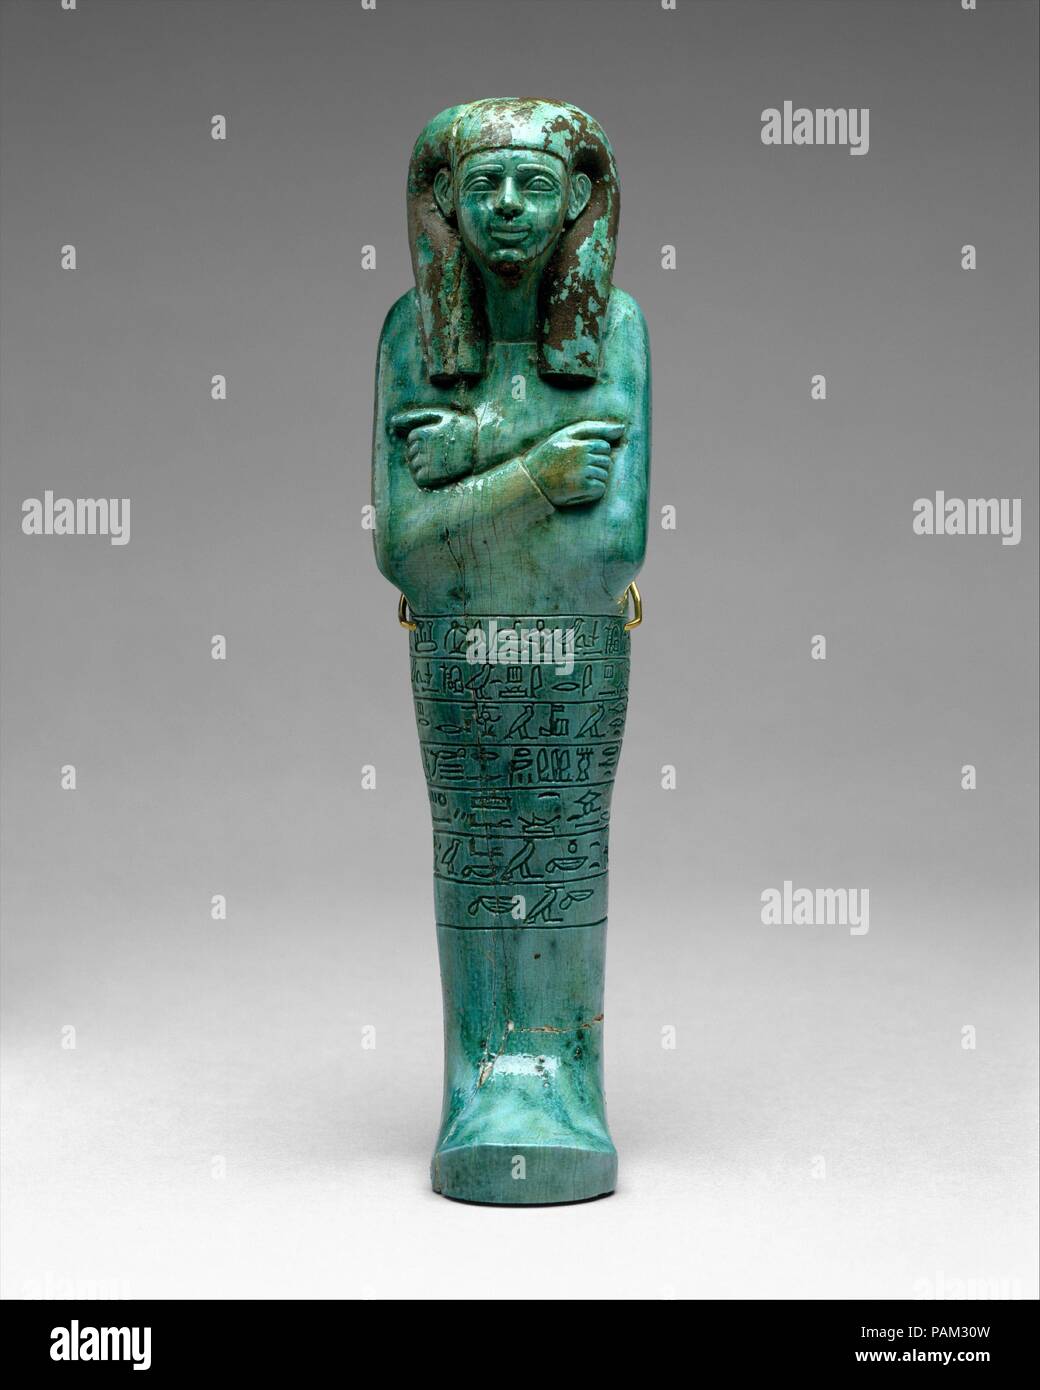 Shabti of Seniu. Dimensions: H. 27.3 cm (10 3/4 in); w. 8 cm (3 1/8 in); d. 5 cm (1 15/16 in). Dynasty: Dynasty 18, early. Reign: reign of Amenhotep I-Thutmose III. Date: ca. 1525-1504 B.C..  The shabti of the chief steward and scribe Seniu is a particularly fine example of this type of funerary figurine from the early New Kingdom. It is inscribed with the spell ensuring that the shabti will perform certain kinds of labor for the deceased in the afterlife. This work included maintenance of irrigation canals, and cultivation of the fields.   The shabti was discovered during excavations by the M Stock Photo